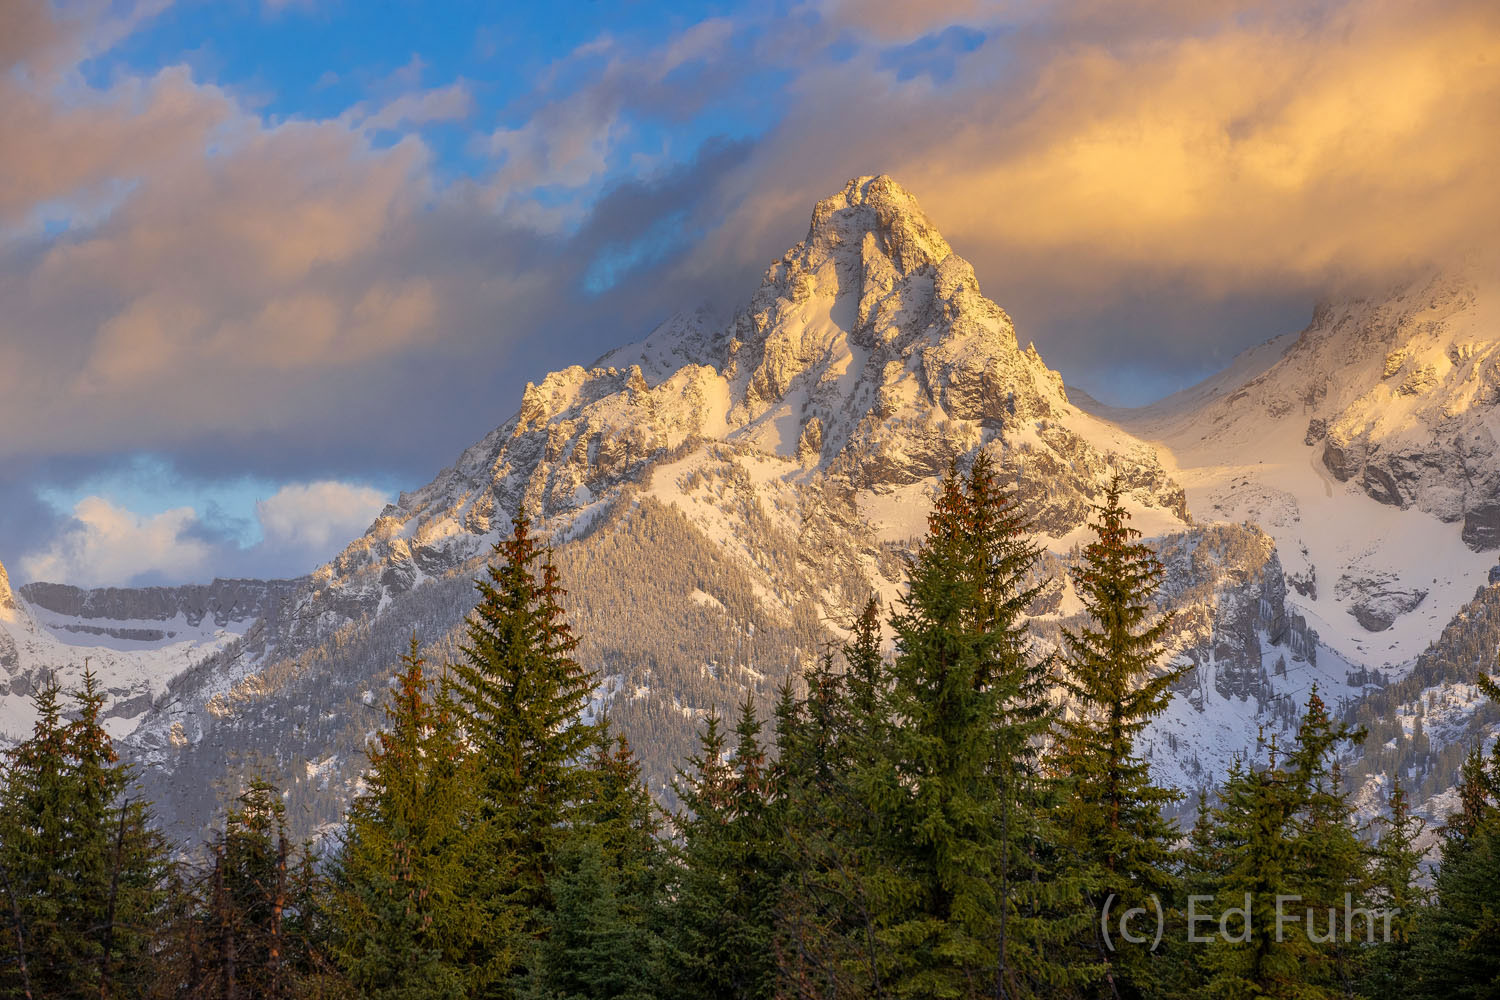 Even in late May, heavy snow continues to cloak the high peaks of the Teton range but the golden glow of this sunrise hints at...